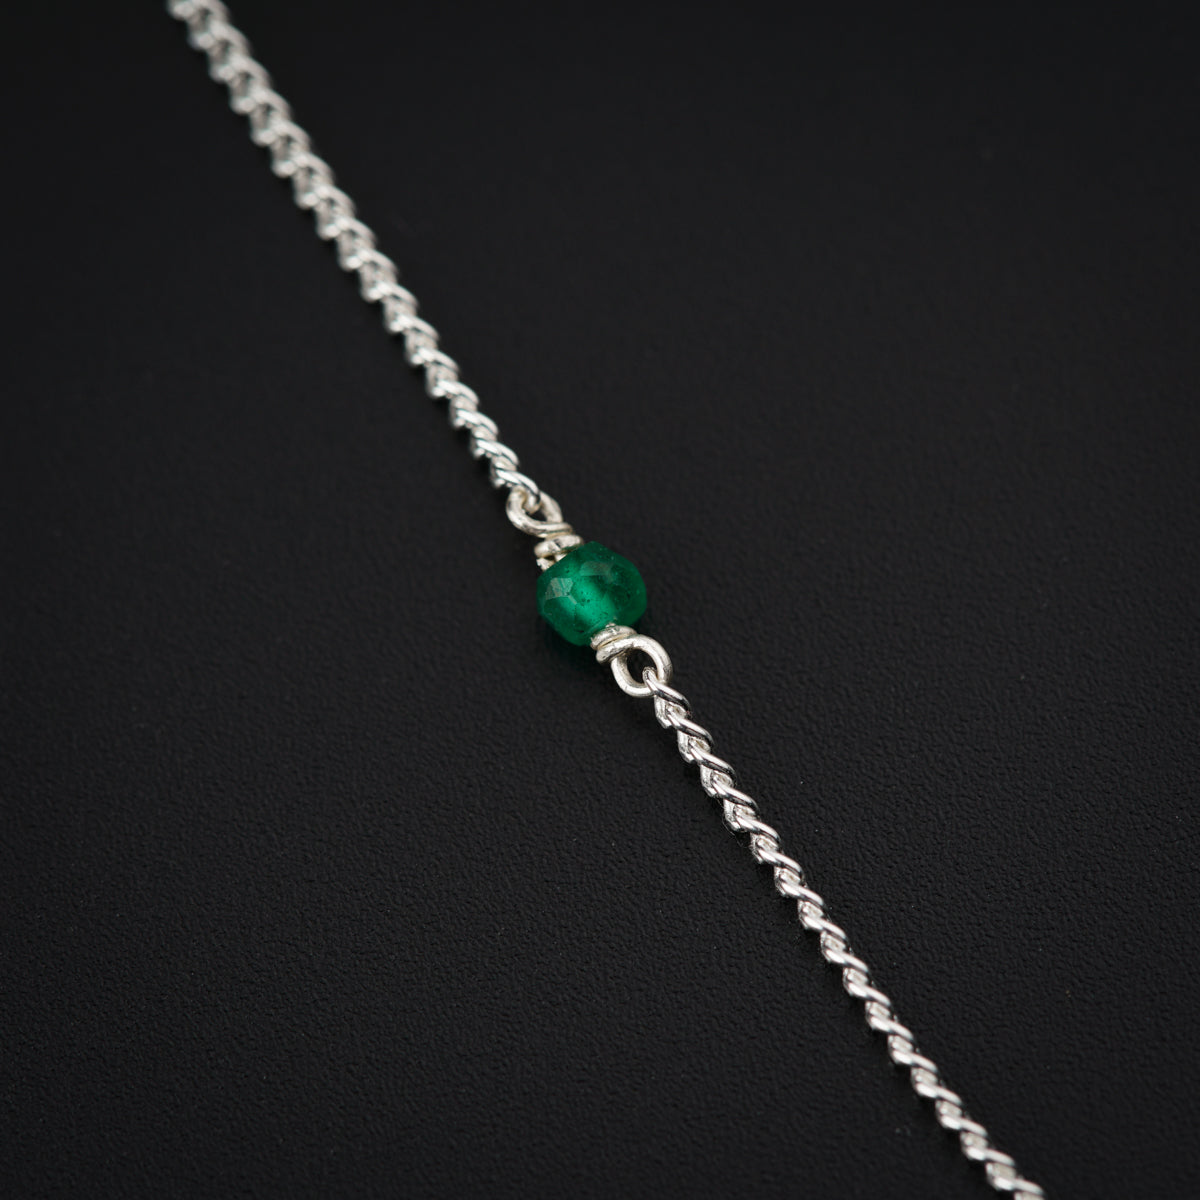 a silver chain with a green stone on it